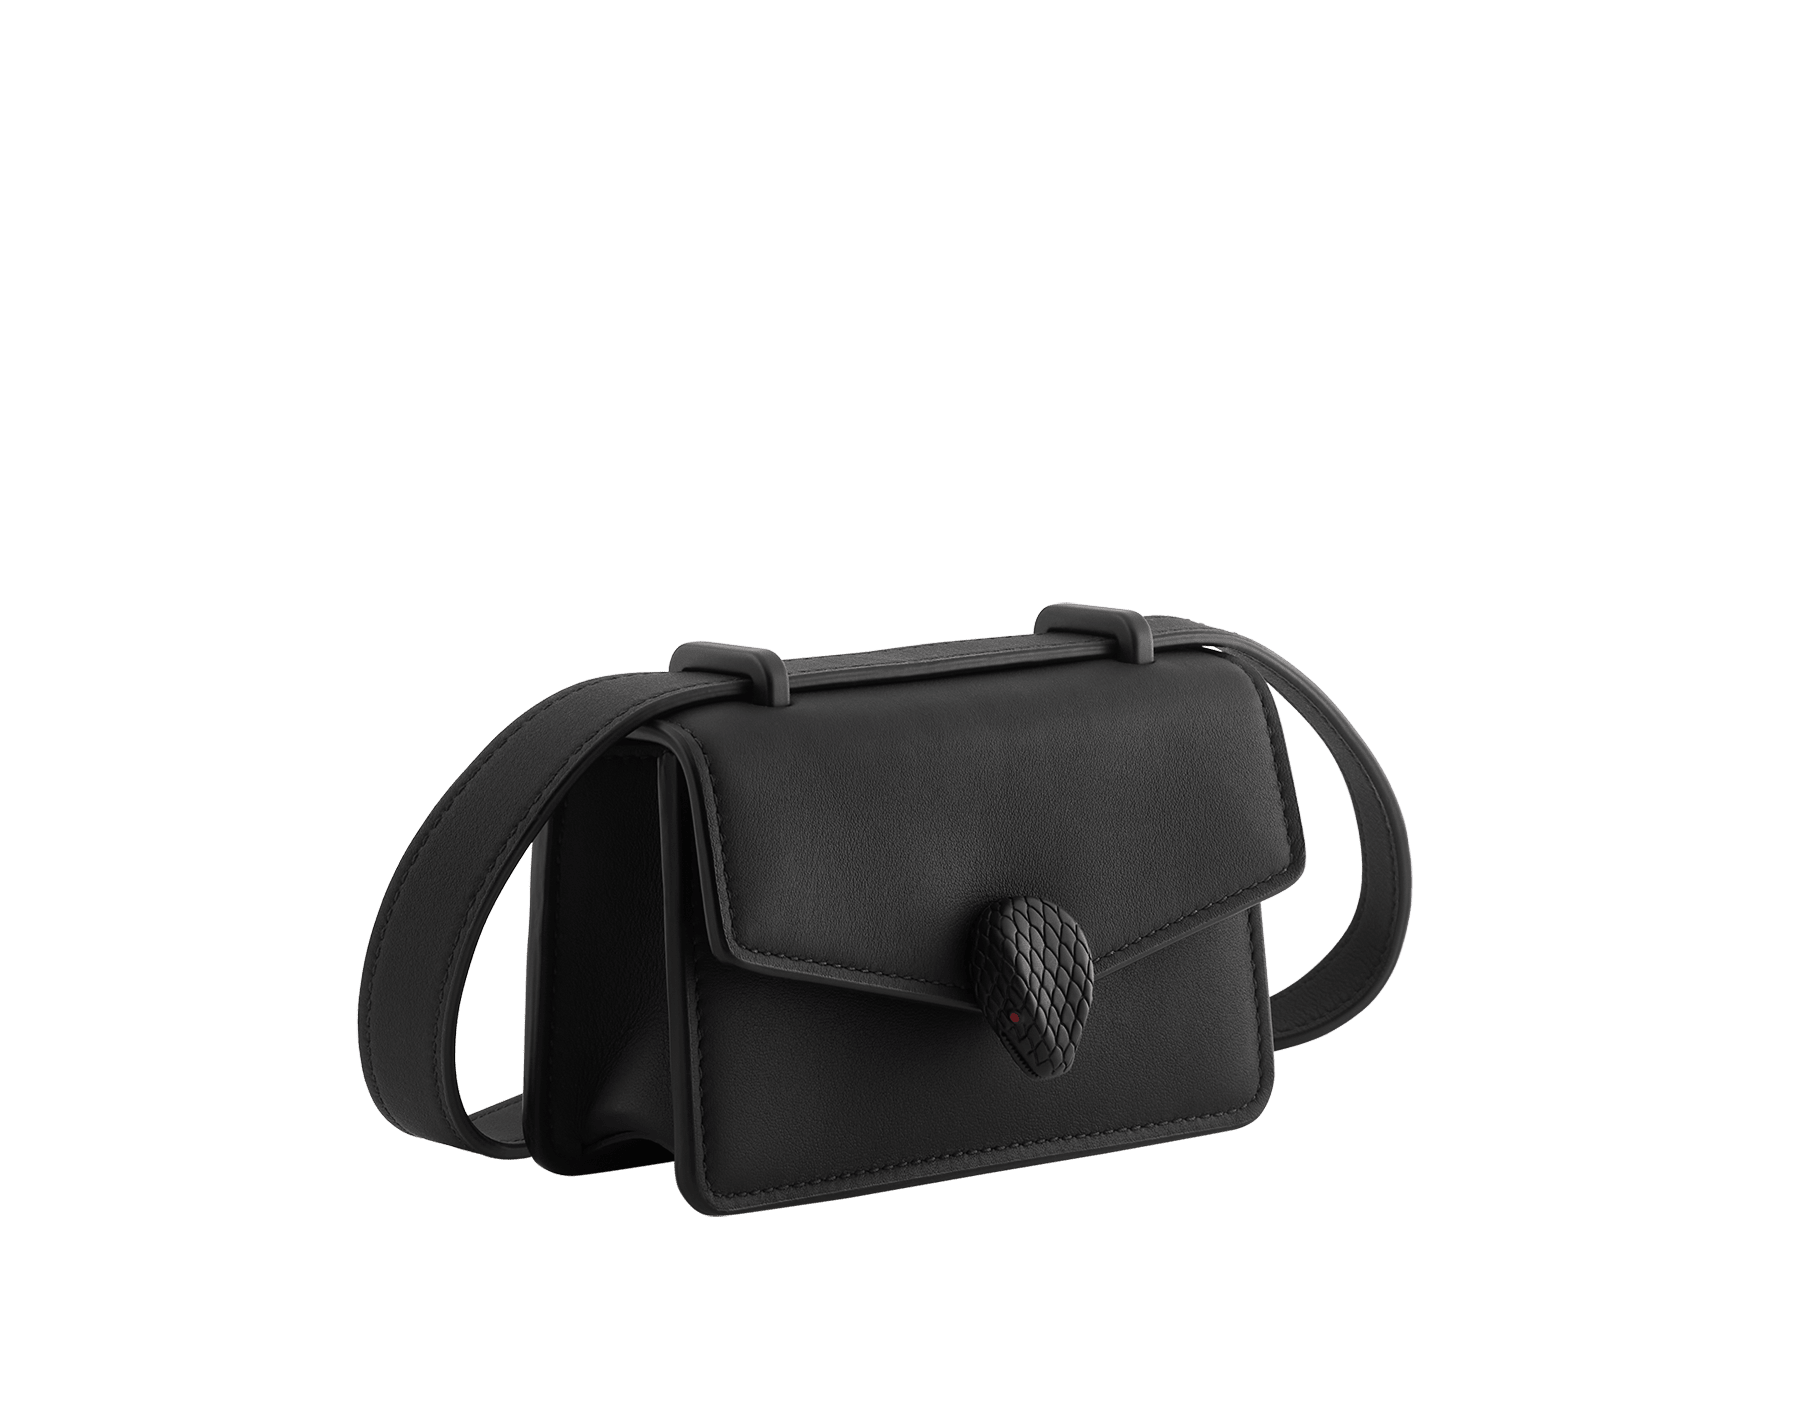 Serpenti Forever unisex micro bag in matte black calf leather with black nappa leather lining. Captivating snakehead closure in dark ruthenium-plated brass enameled in matte black and embellished with red enamel eyes. SEA-UNIMINIBAG image 1